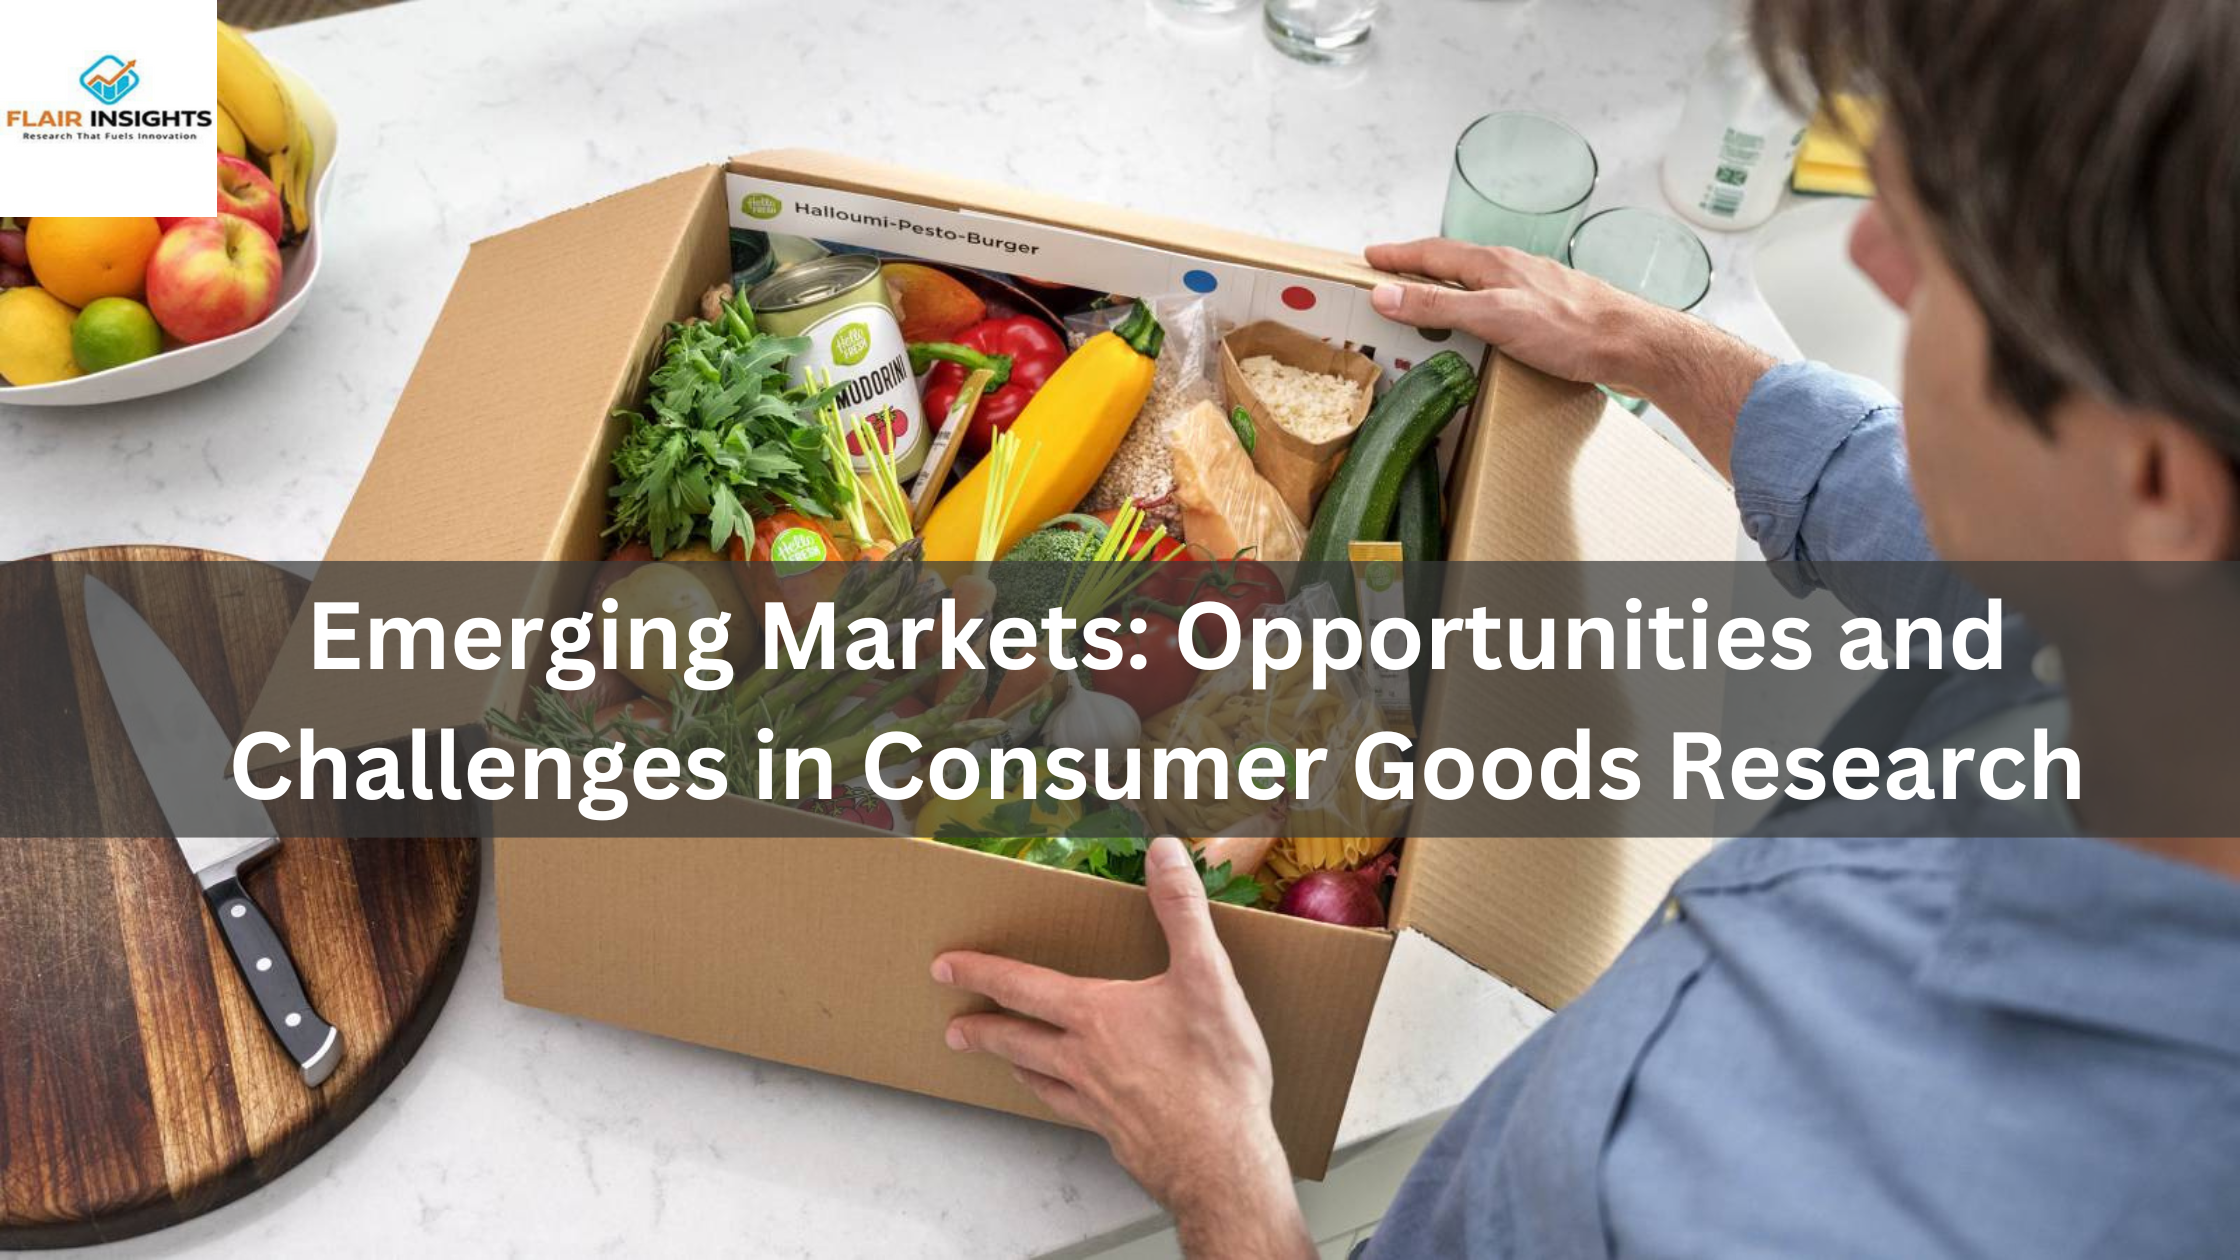 Emerging Markets: Opportunities and Challenges in Consumer Goods Research